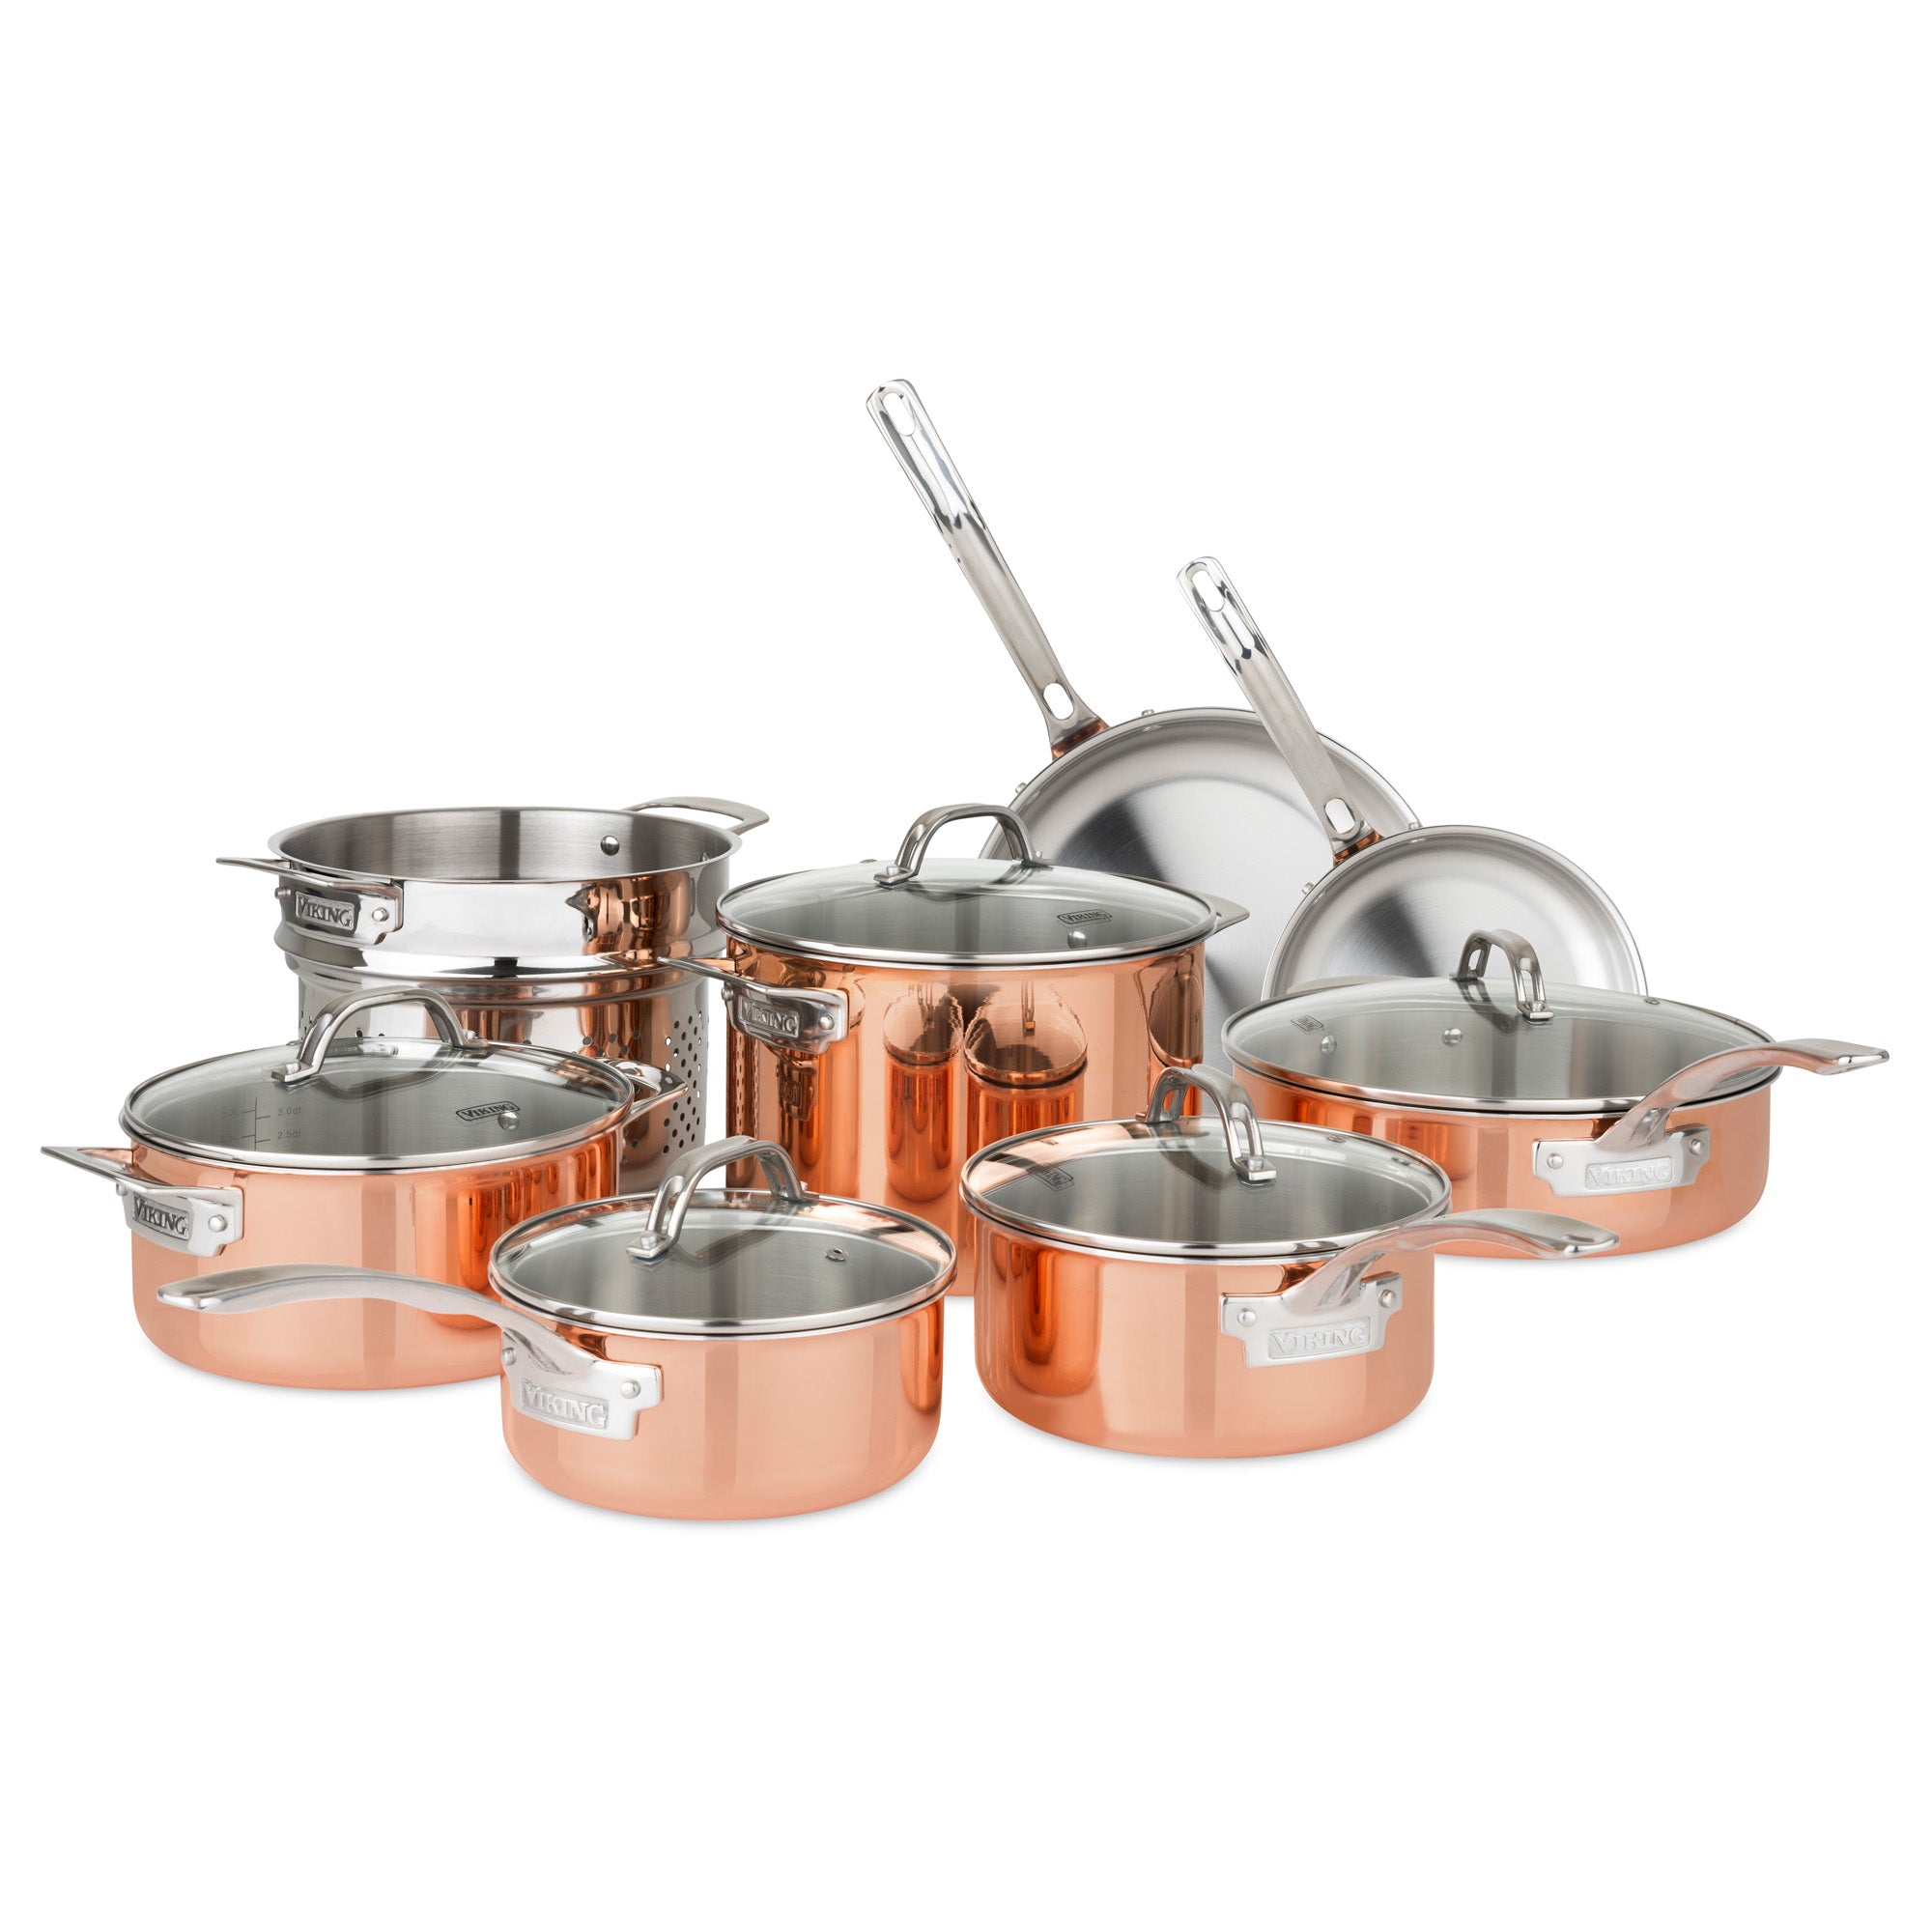  Viking Culinary 3-Ply Stainless Steel Hammered Copper Clad Cookware  Set, 10 Piece, Oven Safe, Works on Electronic, Ceramic, and Gas Cooktops:  Home & Kitchen